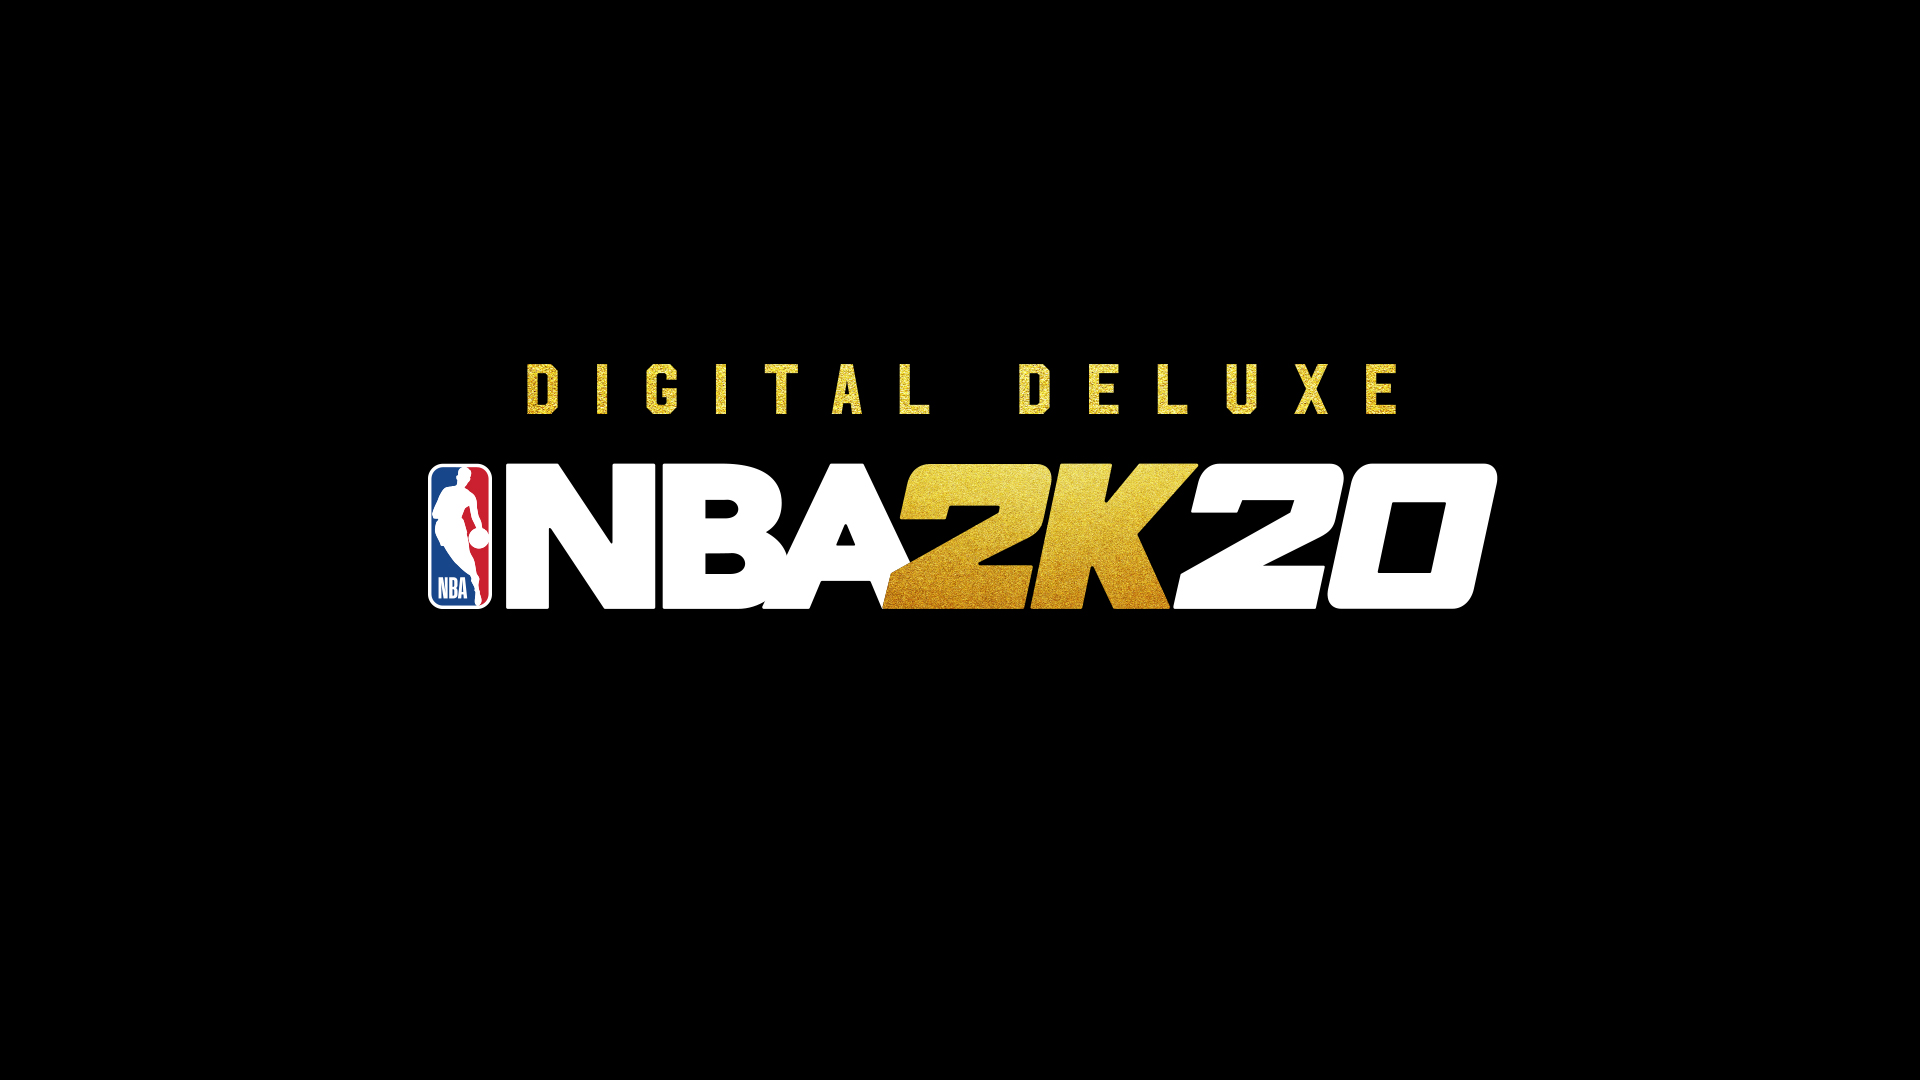 NBA 2K20 Digital Deluxe on PS4 | Official PlayStation™Store Canada1920 x 1080